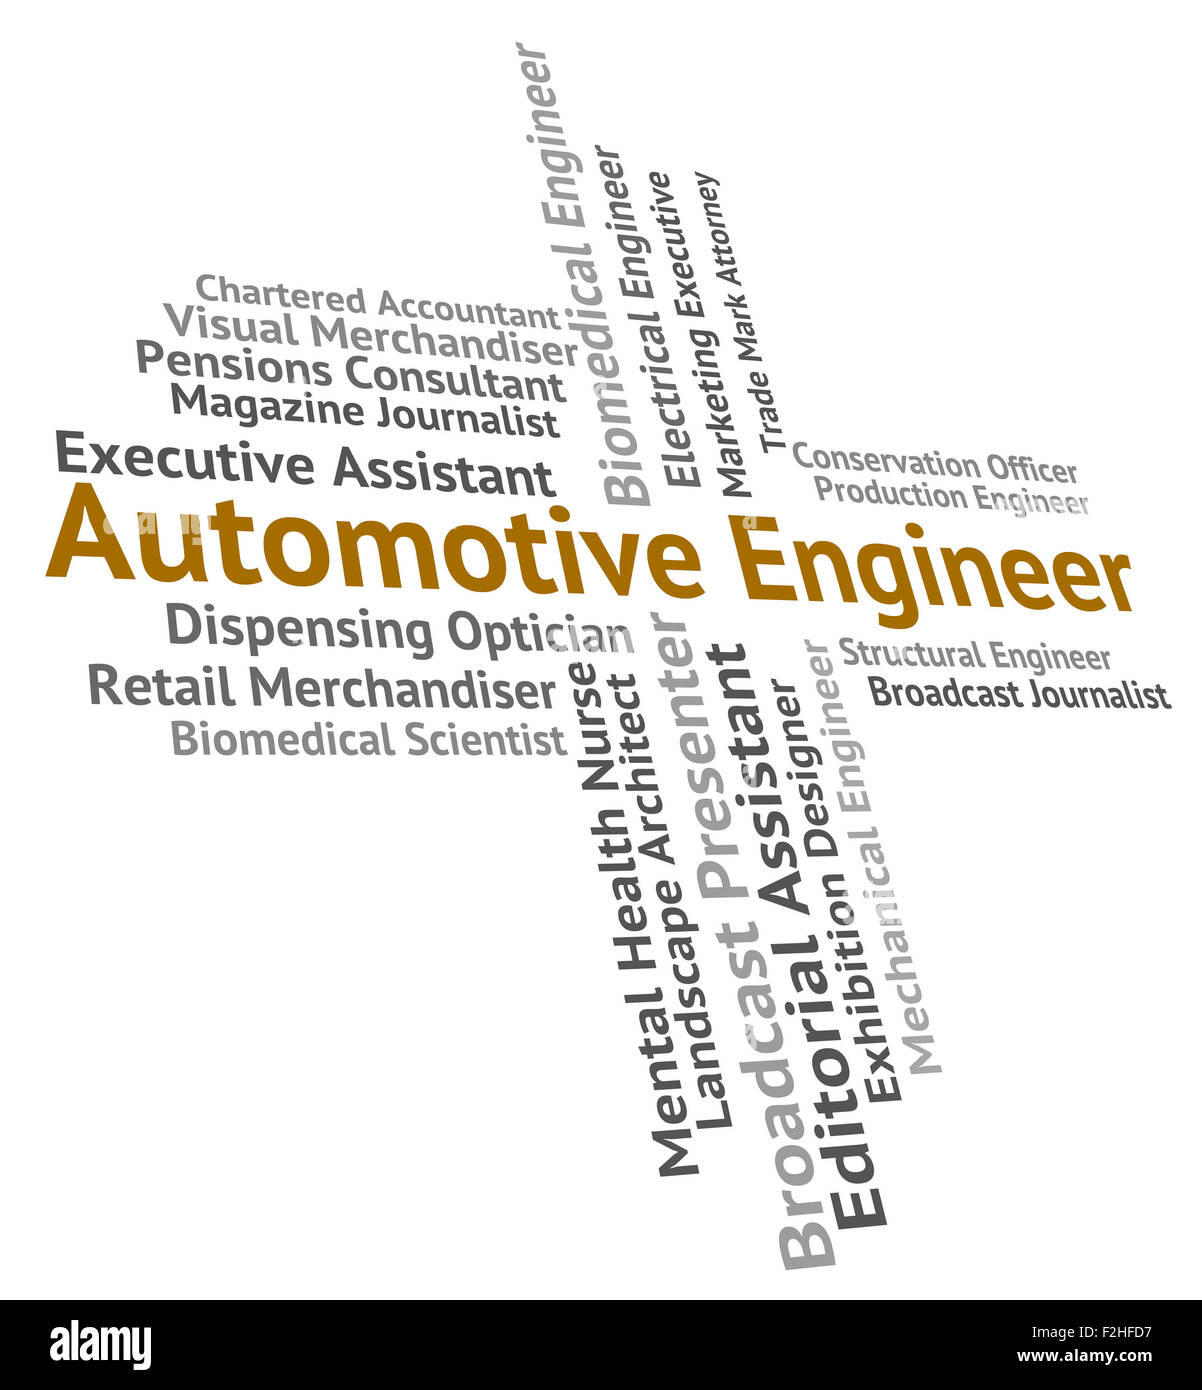 Automotive Engineer Meaning Motor Position And Mechanics Stock Photo